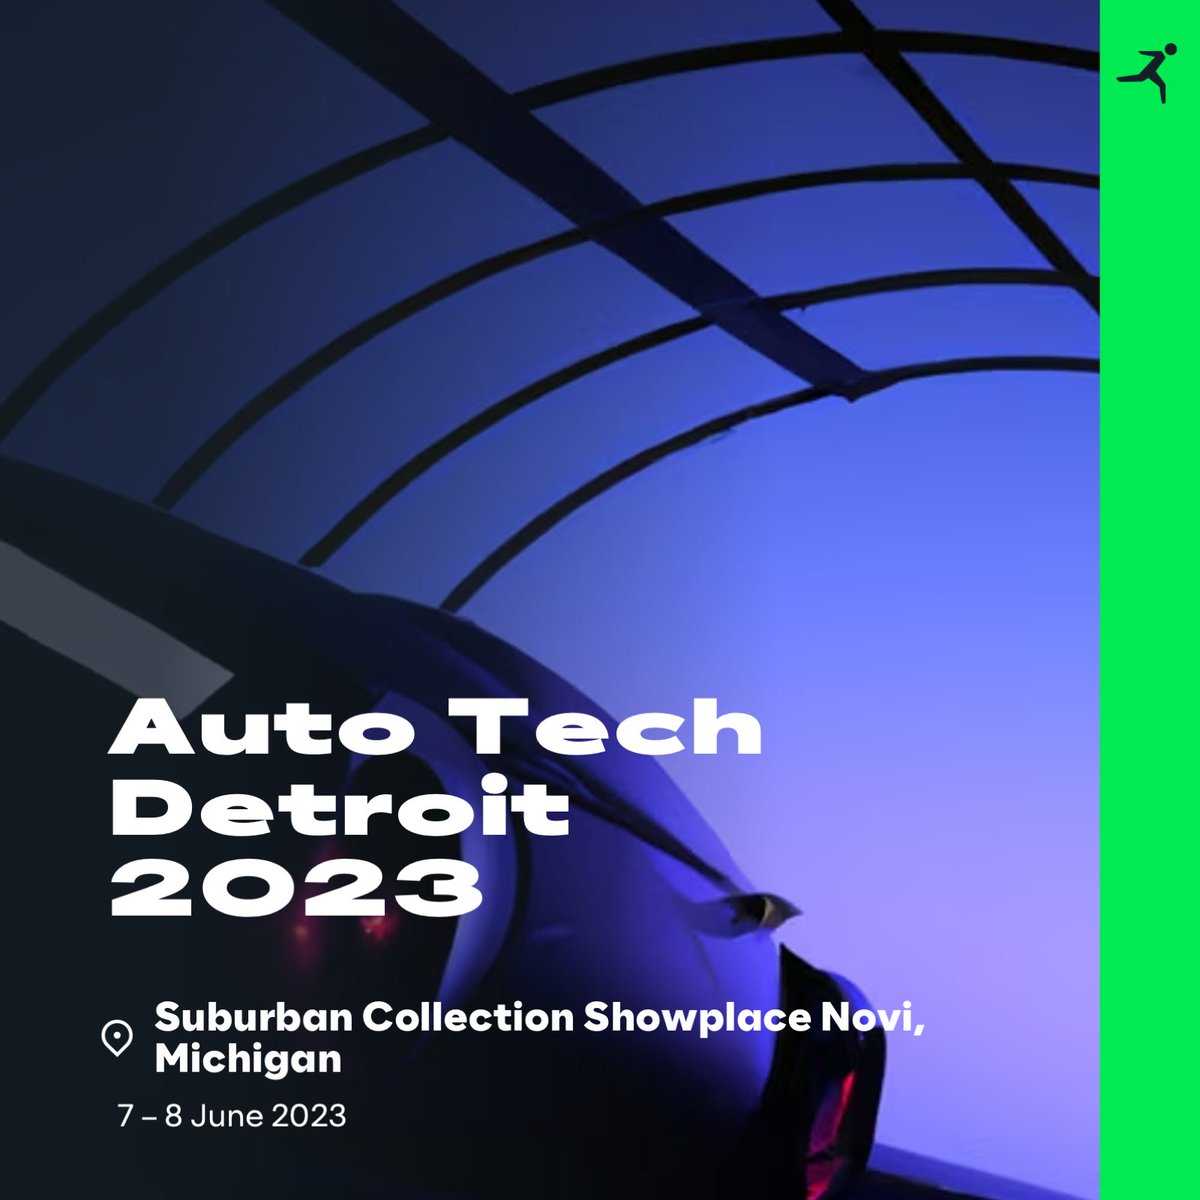 Are you going to be at Auto-tech Detroit from June 7-8? Join Reply and #AWS experts at our exclusive lounge space to learn how we are transforming the driving experience. Stop by booth #835 to meet with our experts!
bit.ly/TechDetroit_TW…